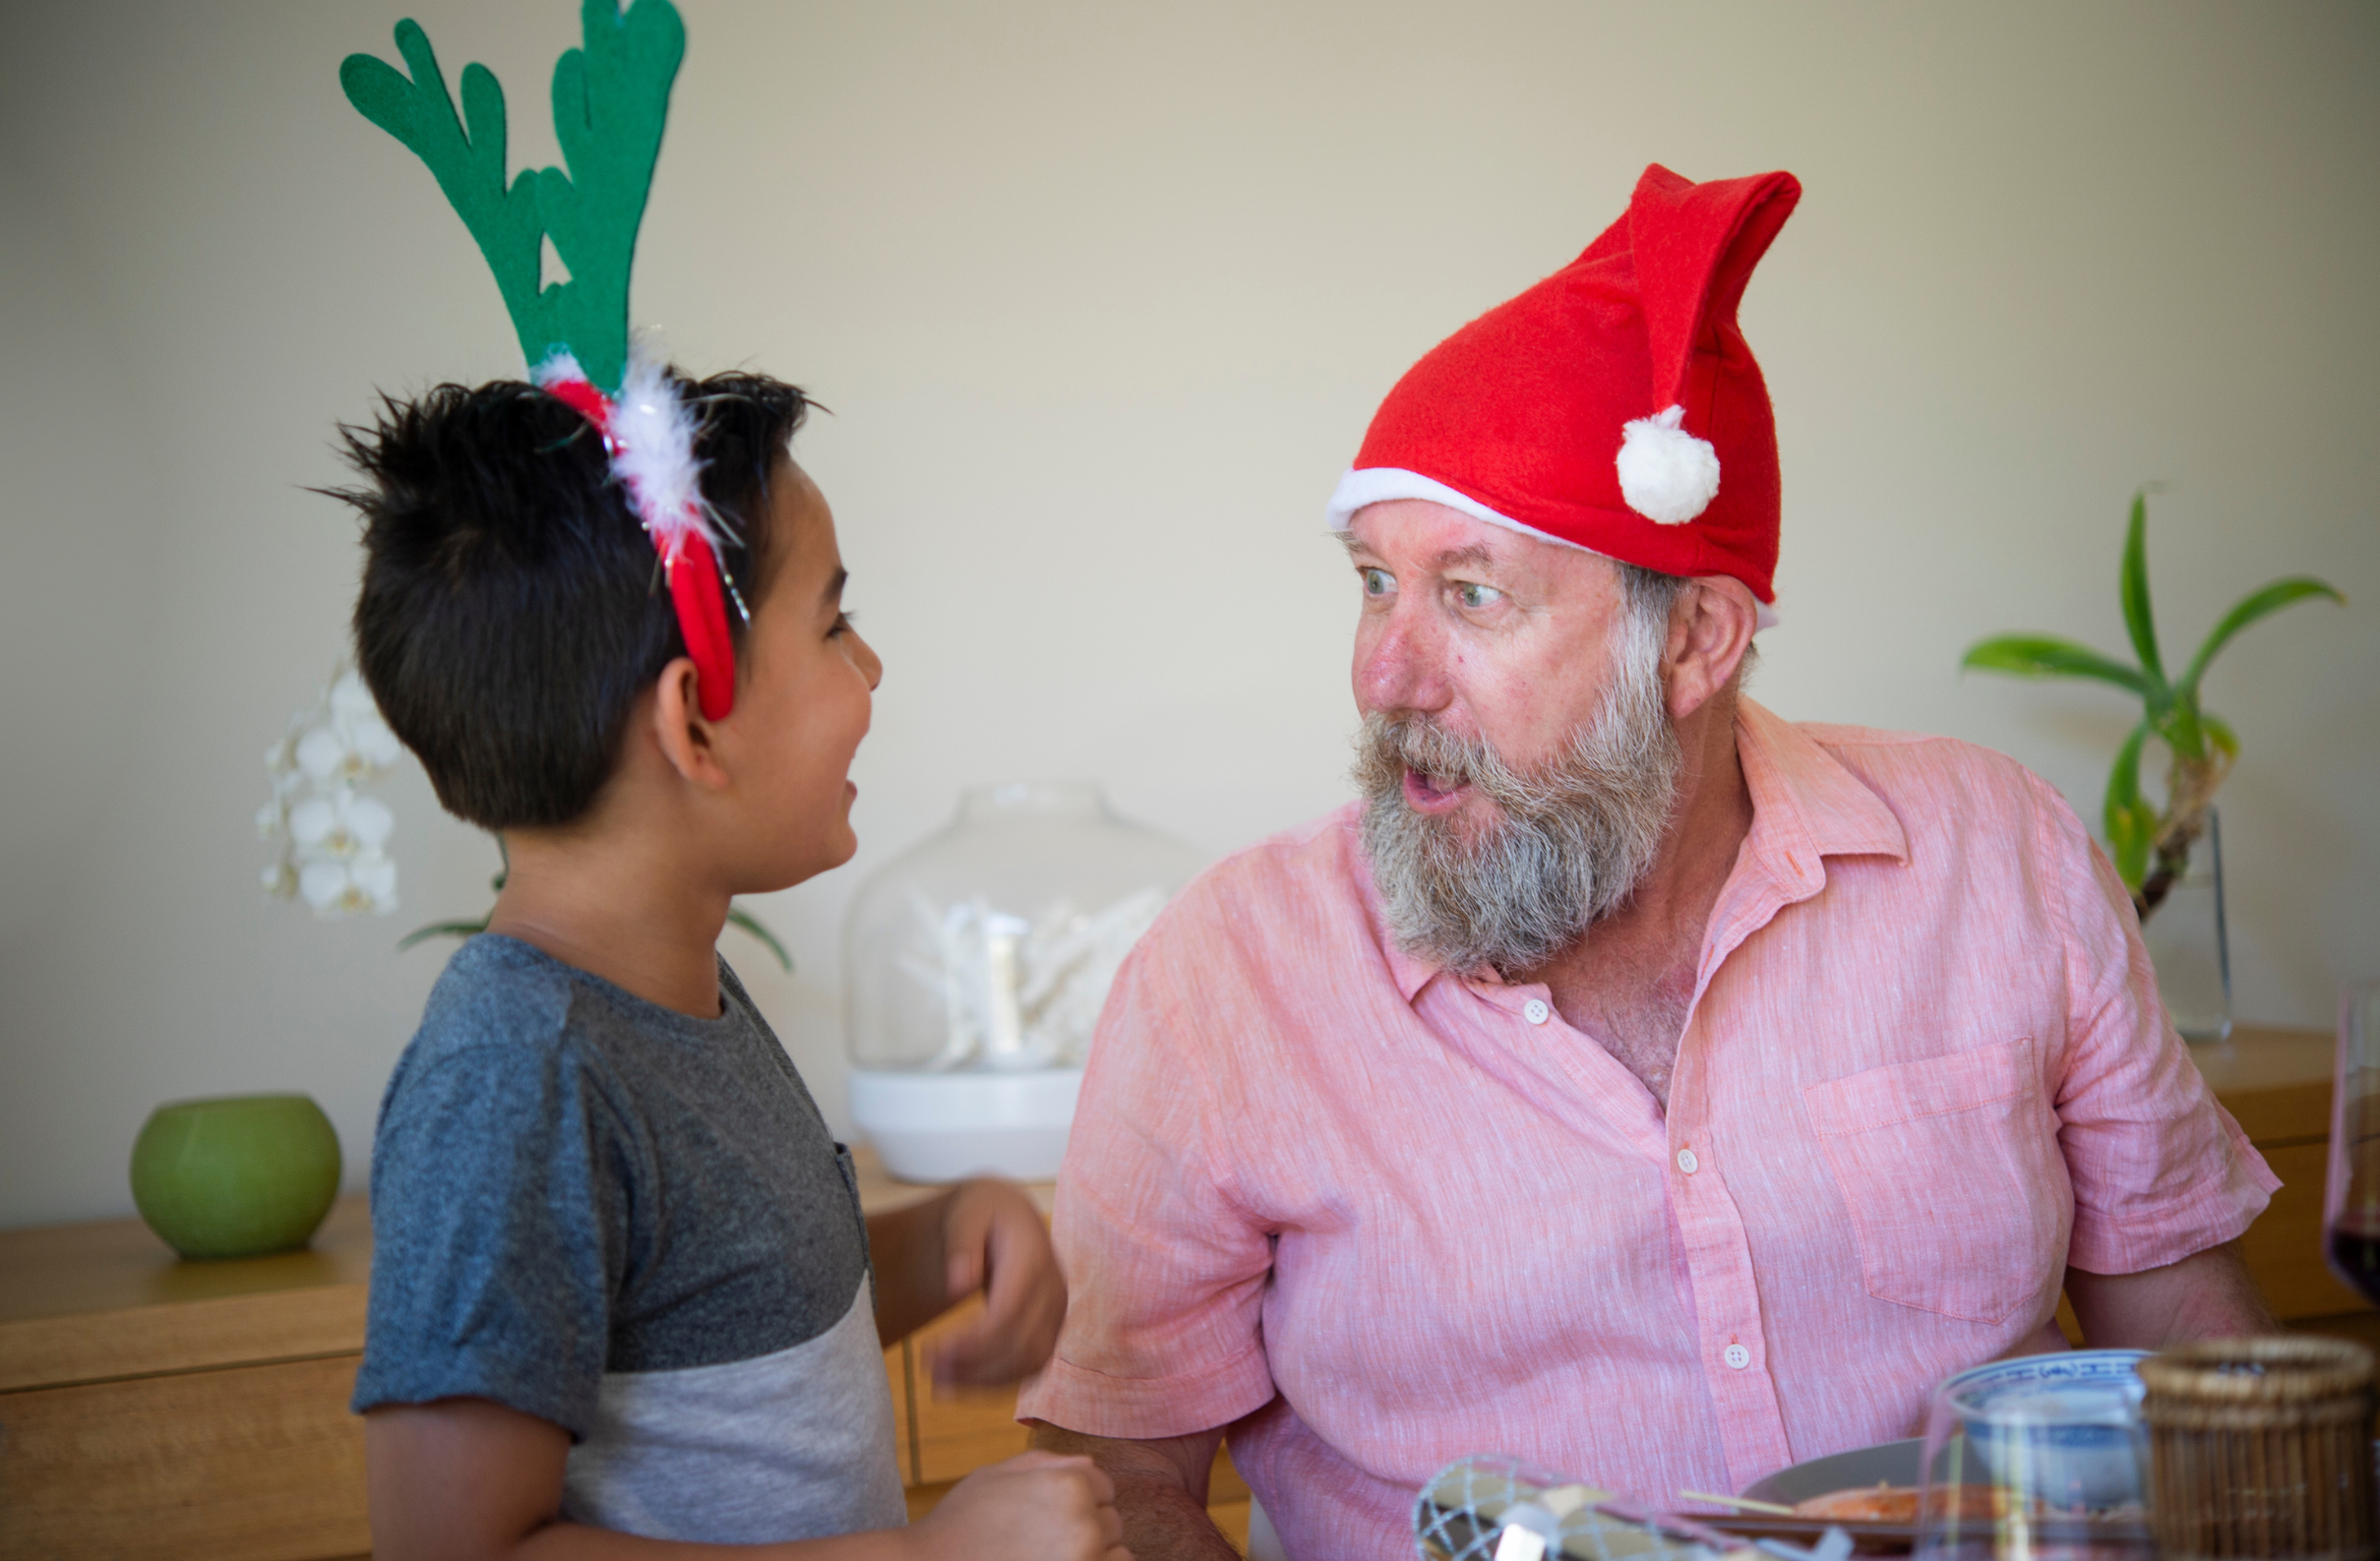 A Trauma Informed approach to the holidays